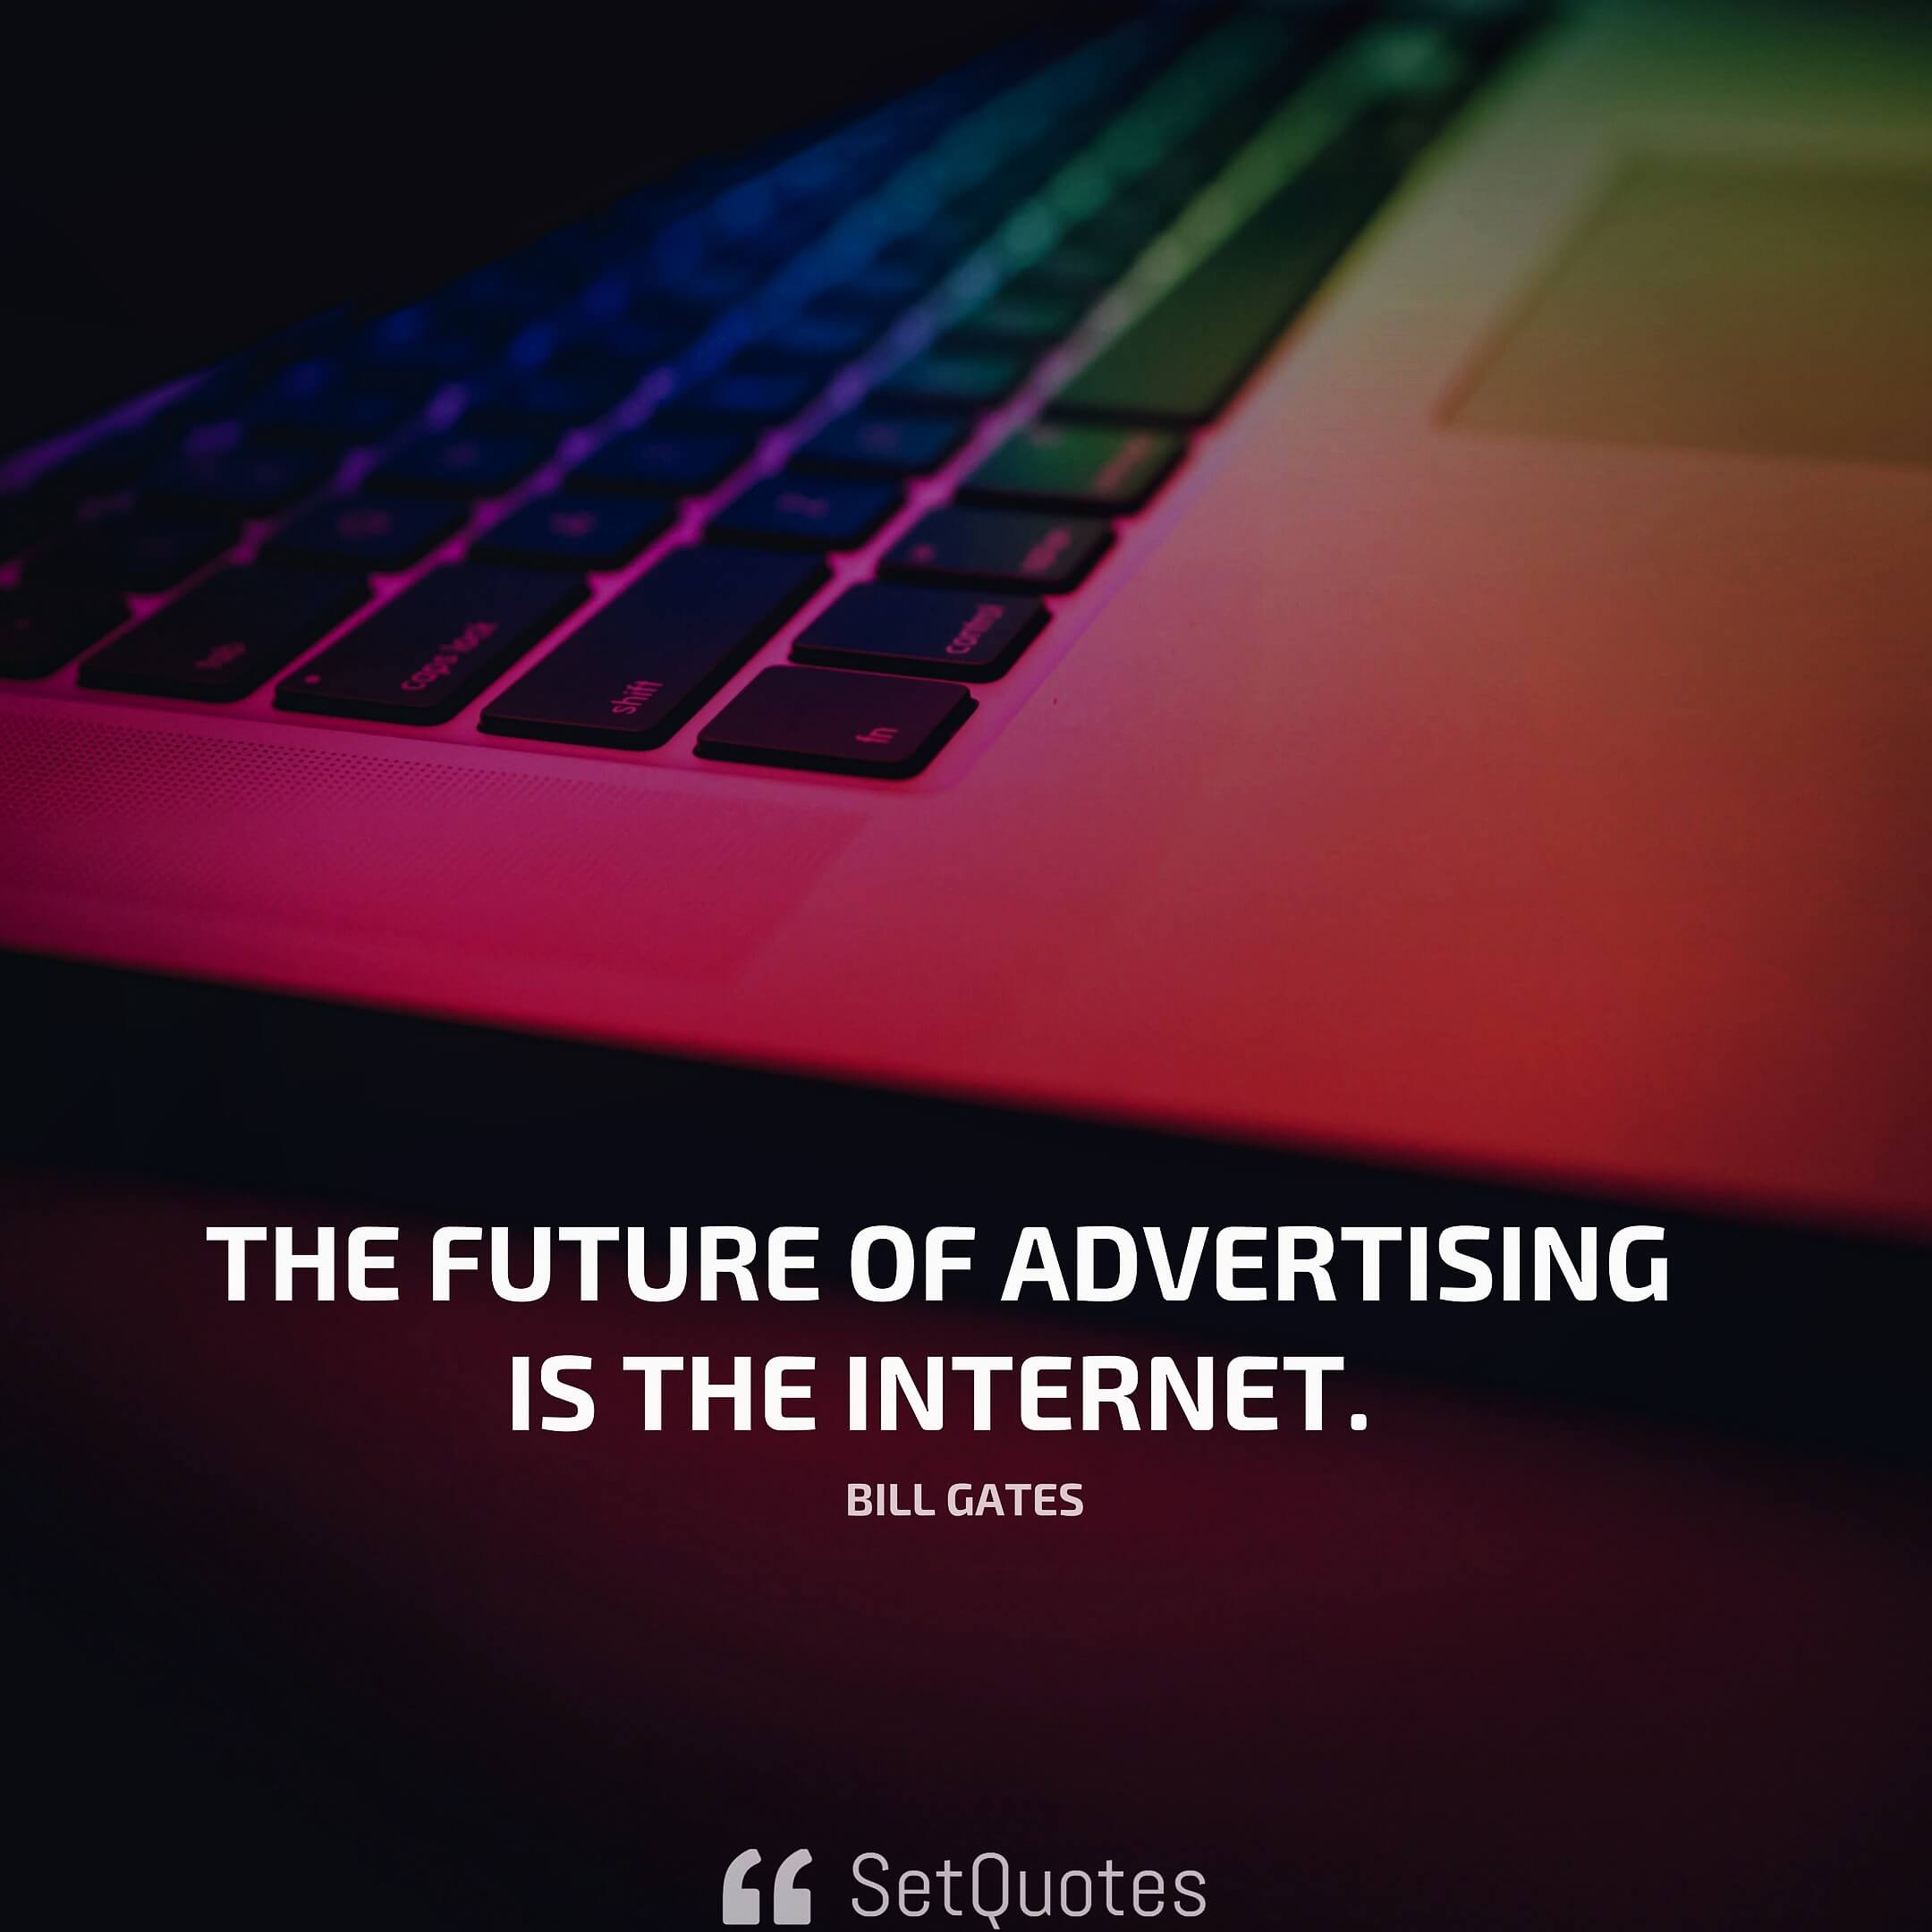 The future of advertising is the Internet. – Bill Gates